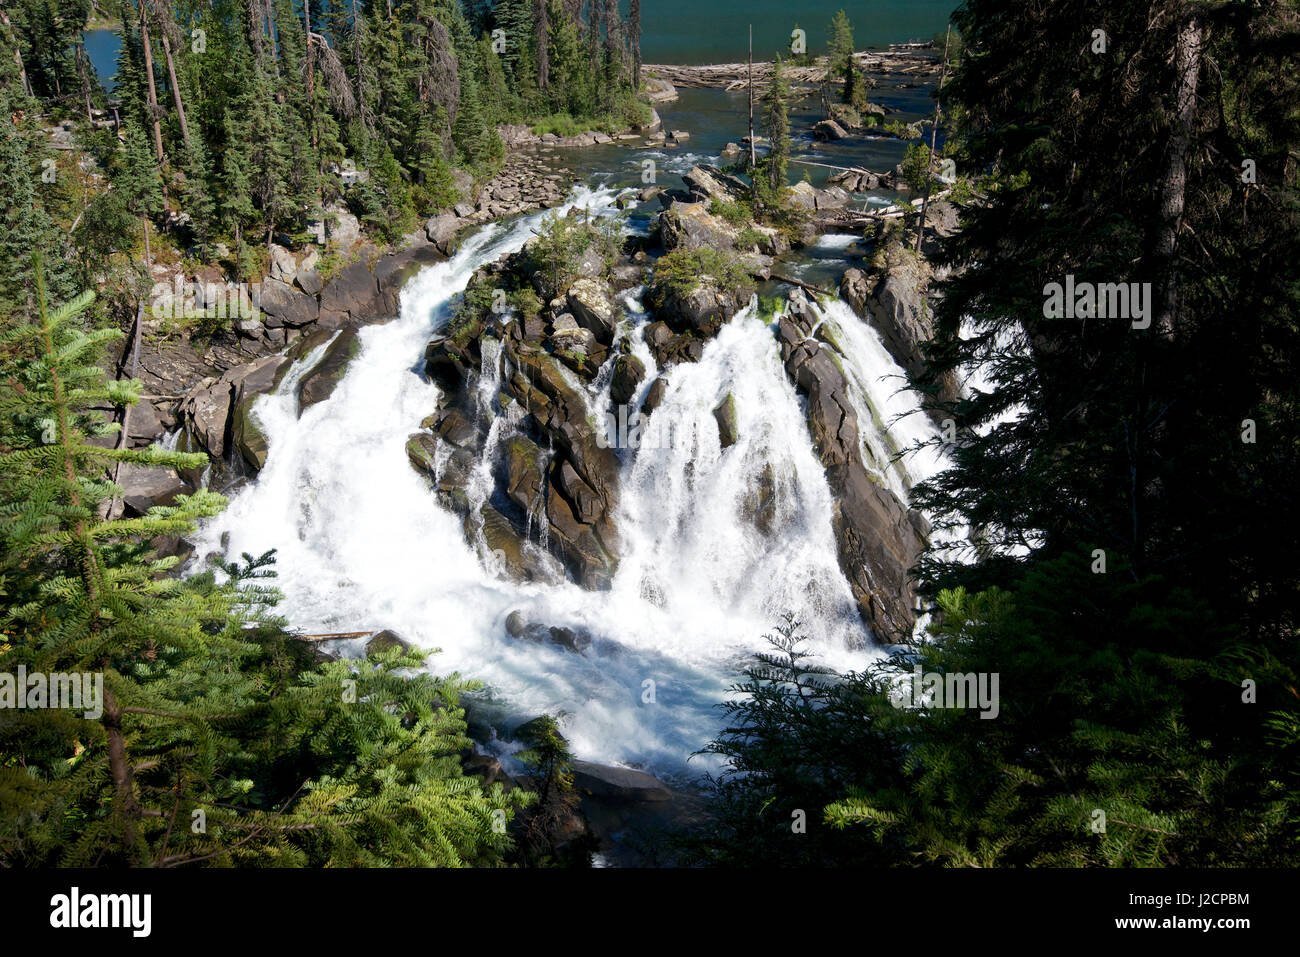 Ghost Lake Falls on the Matthew River in the Cariboo region of British Columbia is one of the most attractive, dramatic falls in the region. (Large format sizes available) Stock Photo